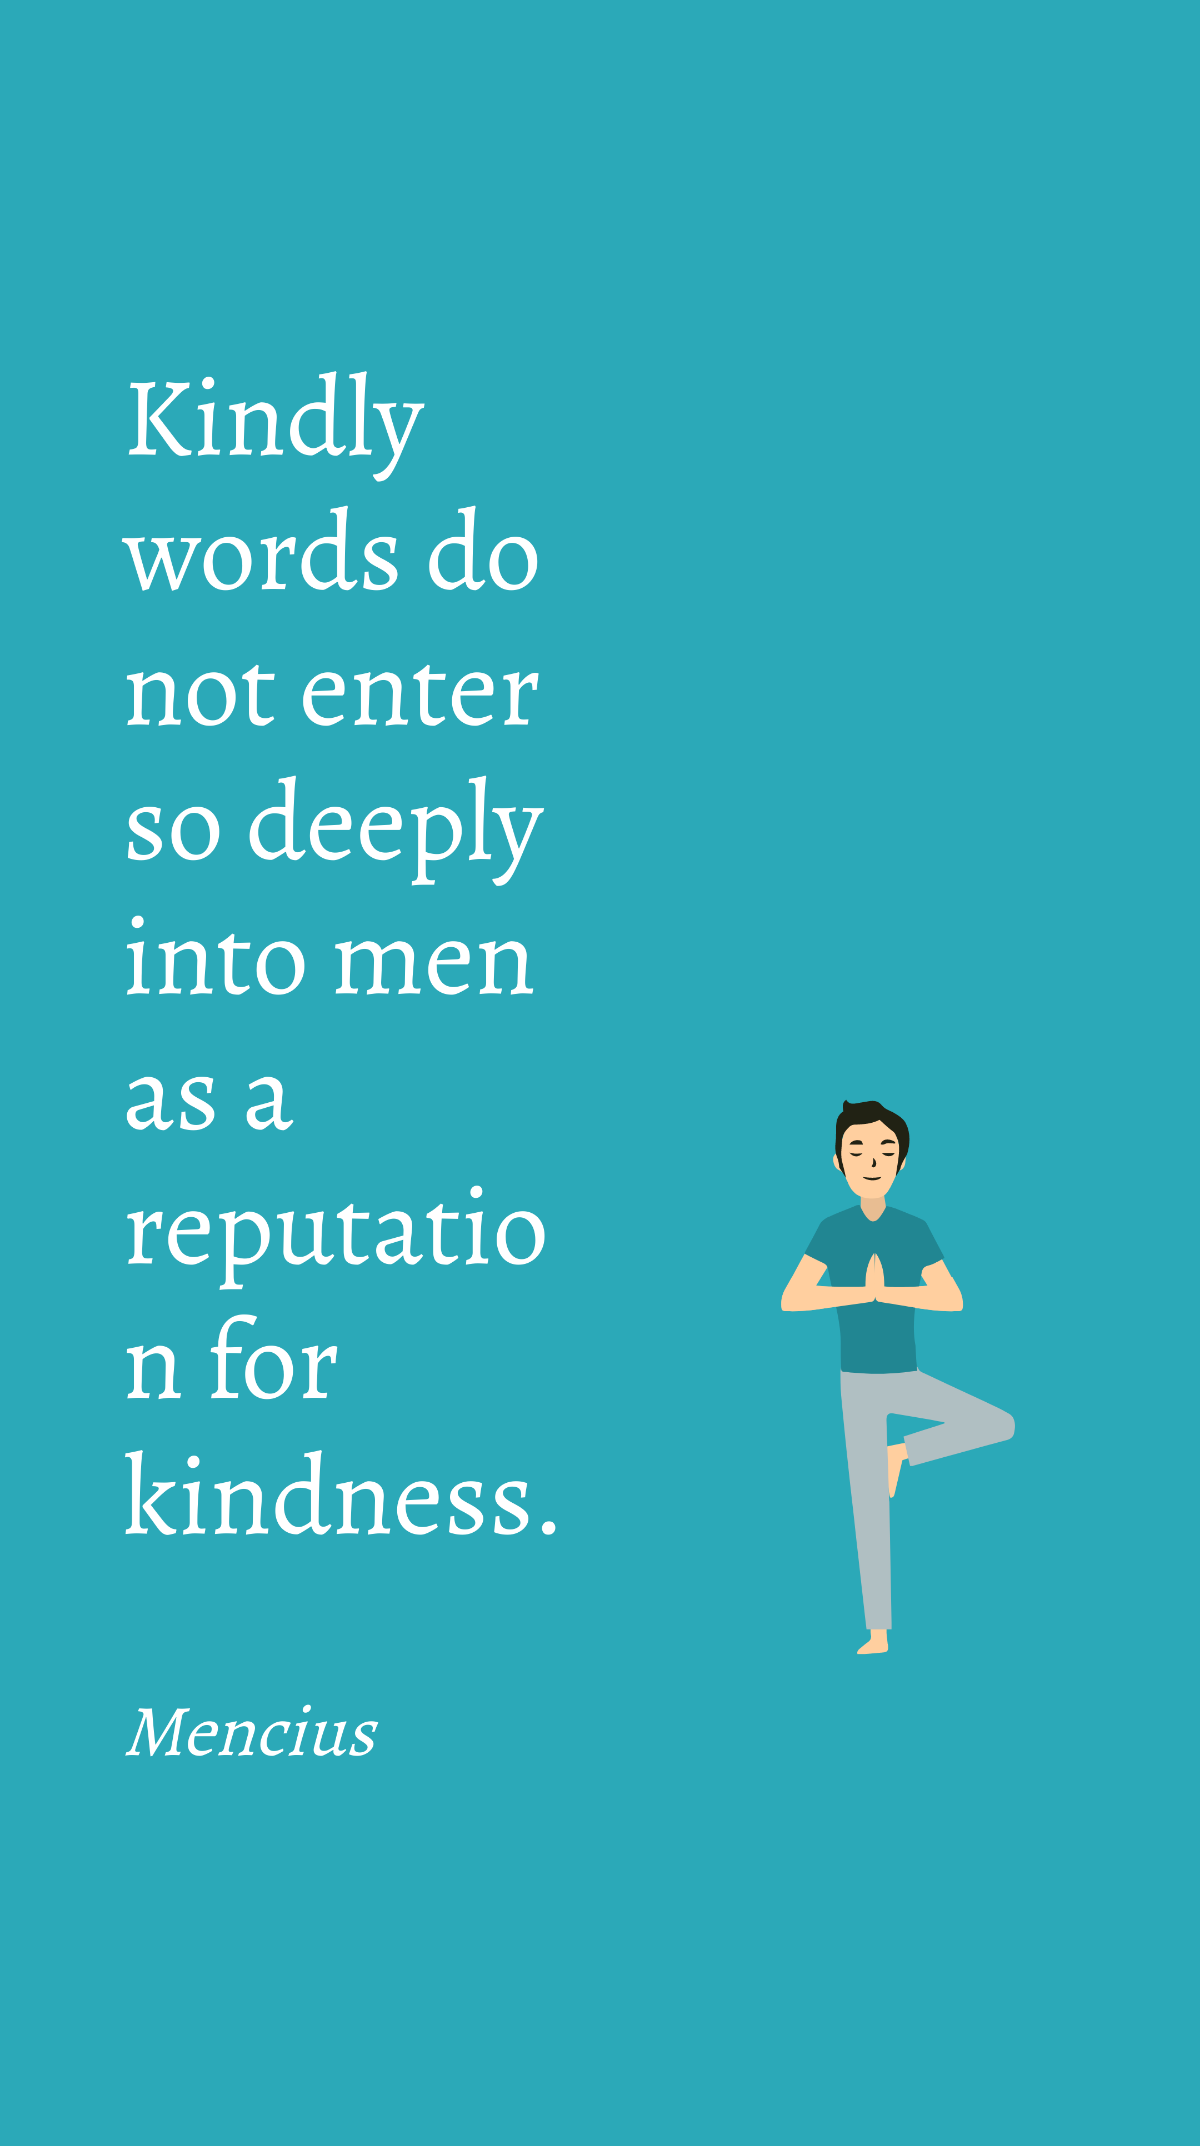 Free Mencius - Kindly words do not enter so deeply into men as a reputation for kindness. Template